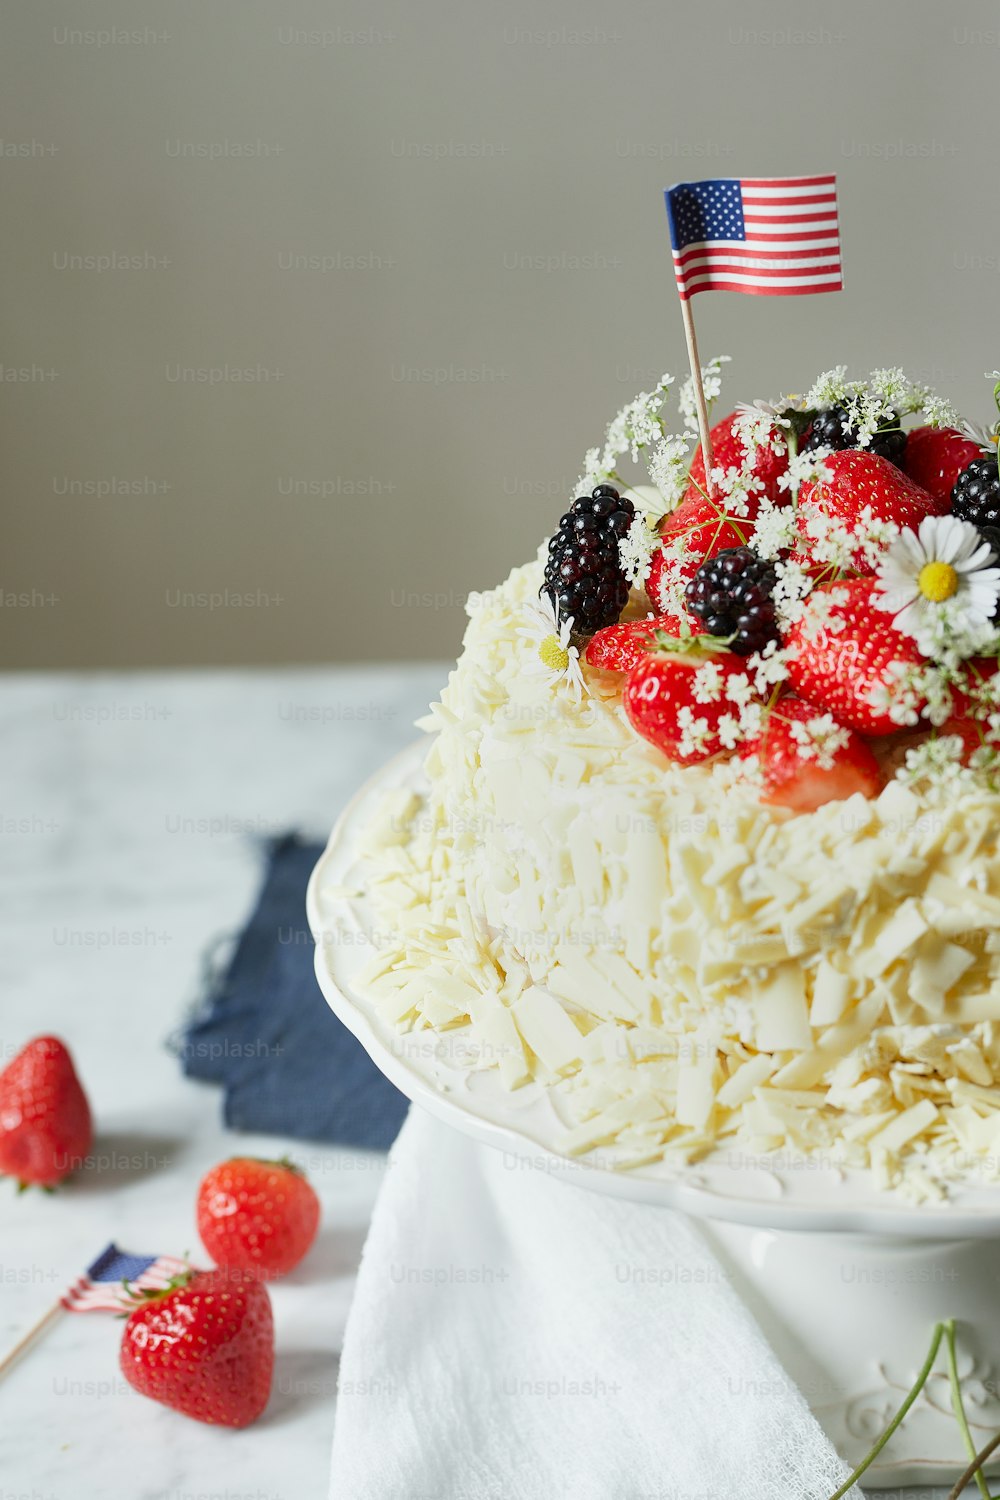 a cake with strawberries, strawberries, and daisies on top of it